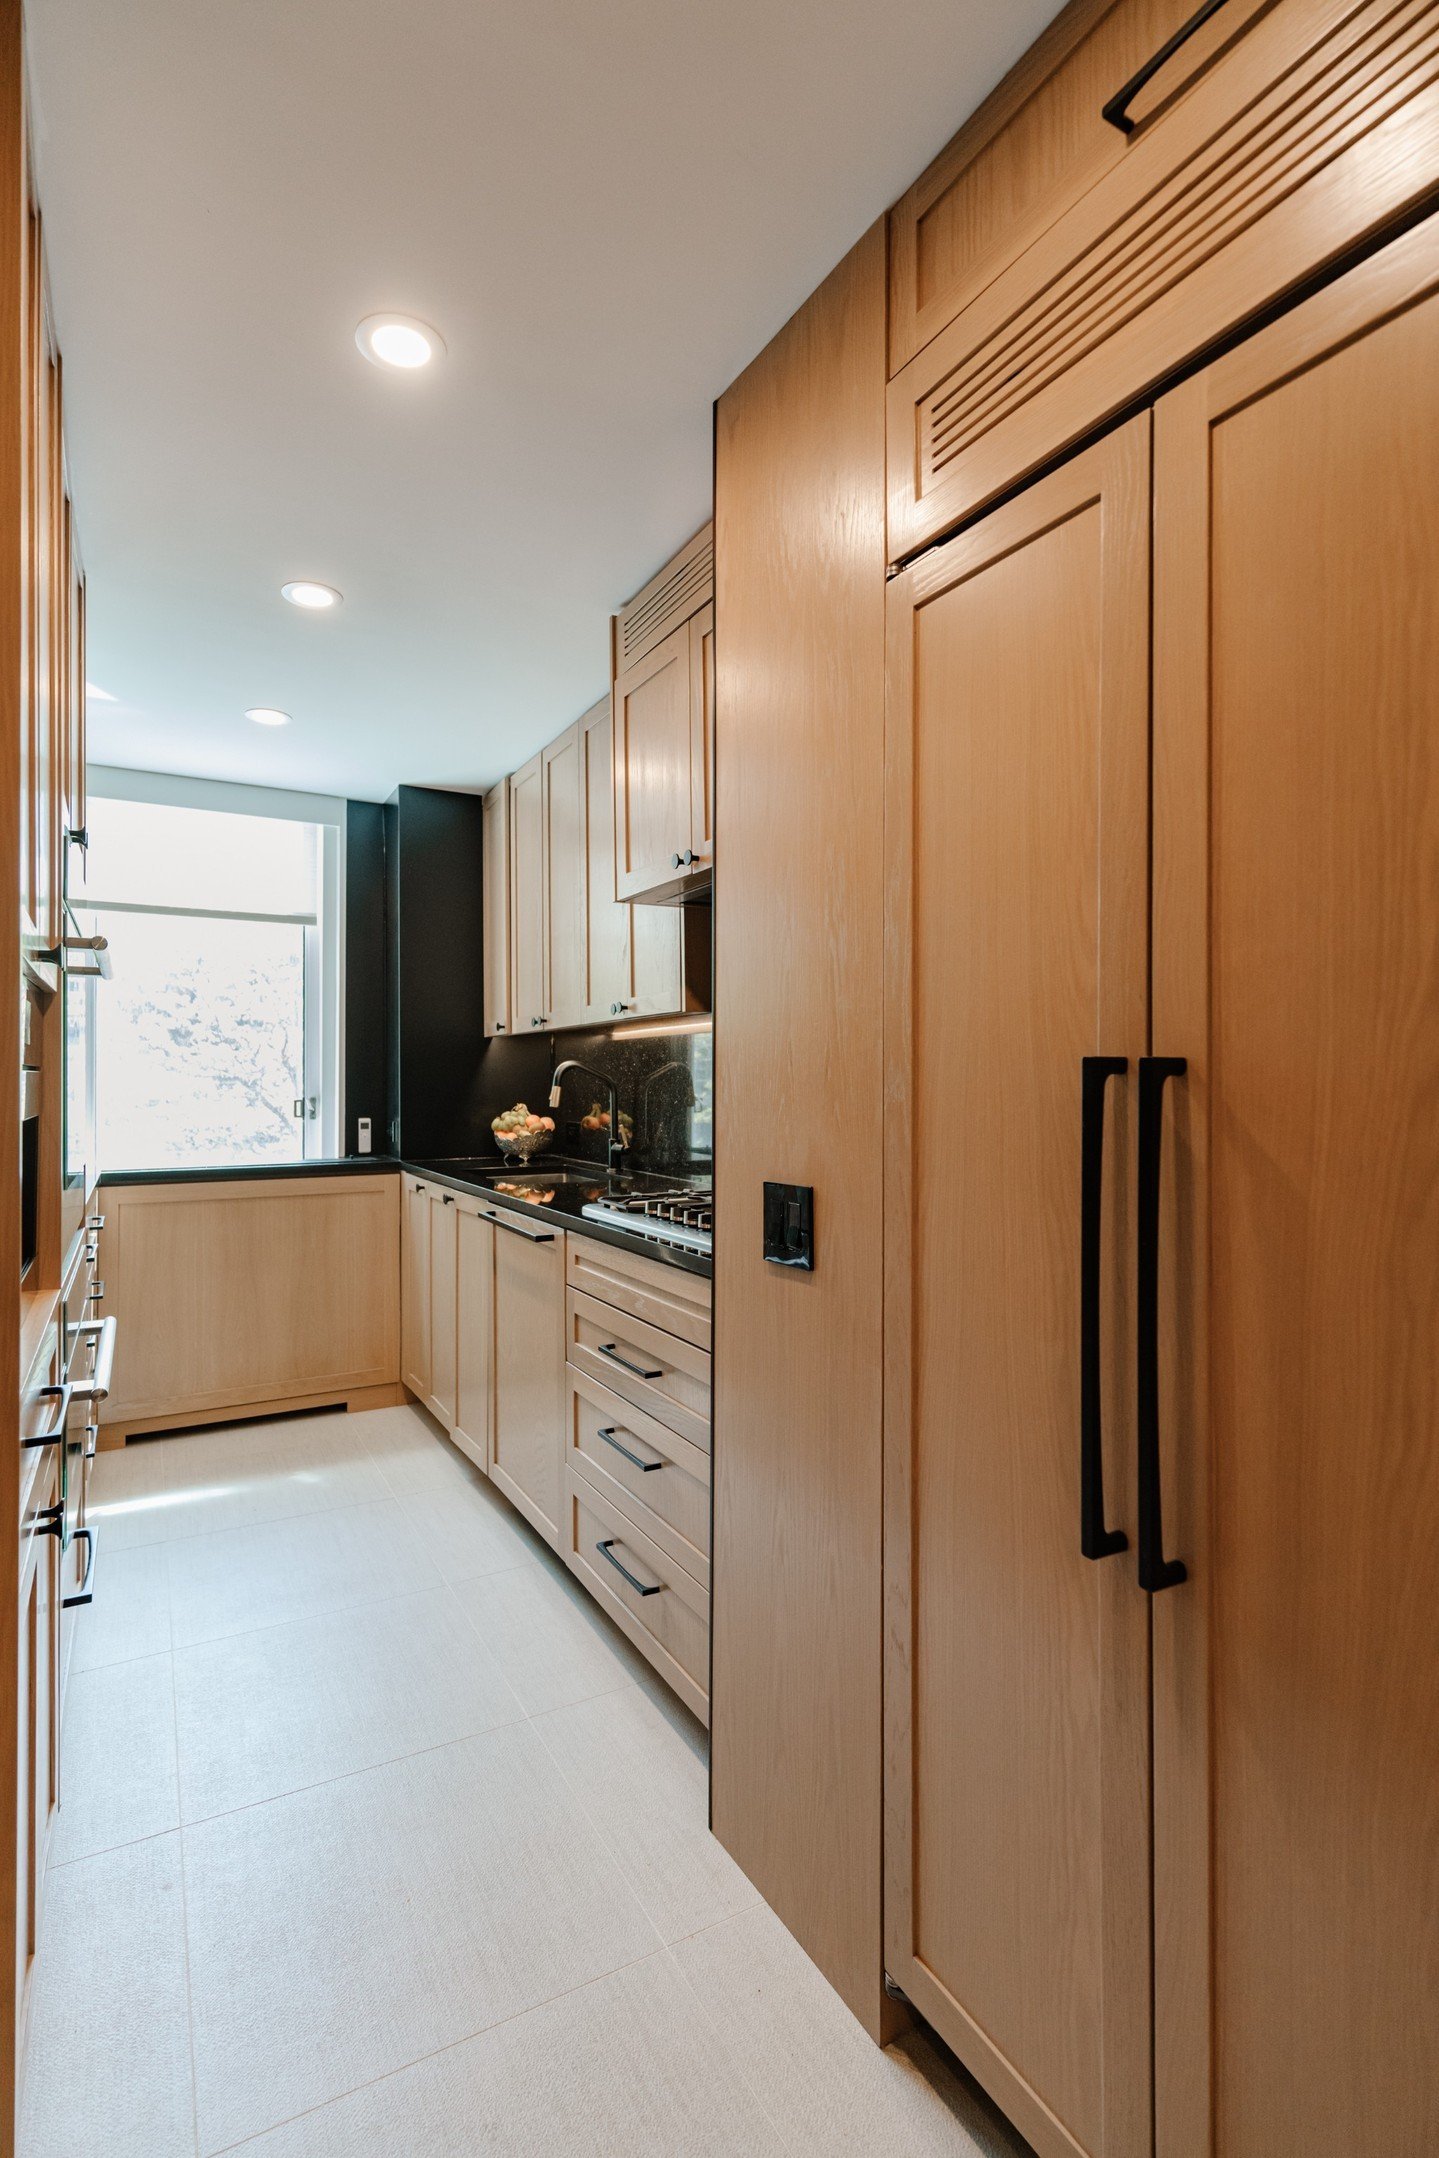 At Upper Construction Solutions, we understand the importance of crafting a kitchen that marries functionality with elegance. Whether it's sleek countertops, custom cabinetry, or innovative layouts, we're here to turn your culinary dreams into realit